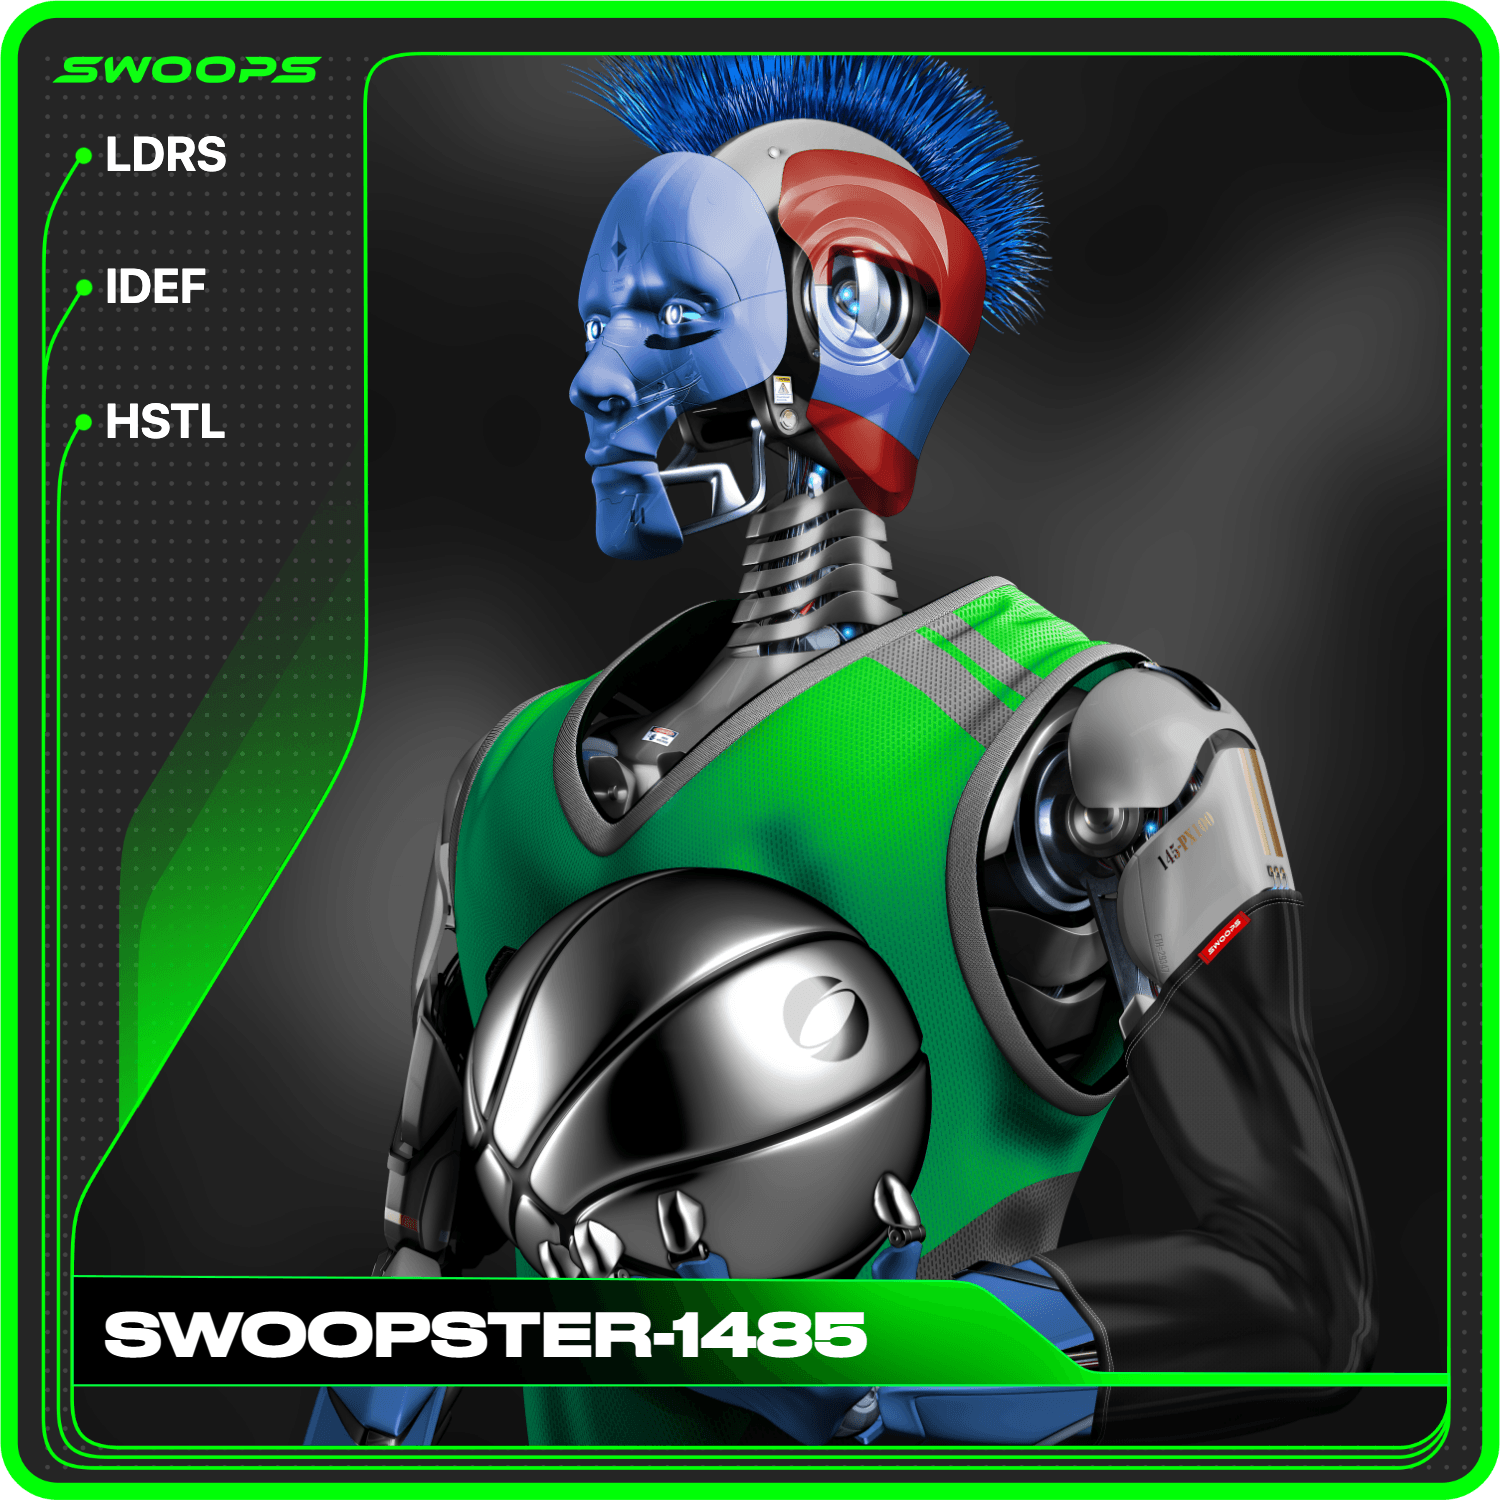 SWOOPSTER-1485